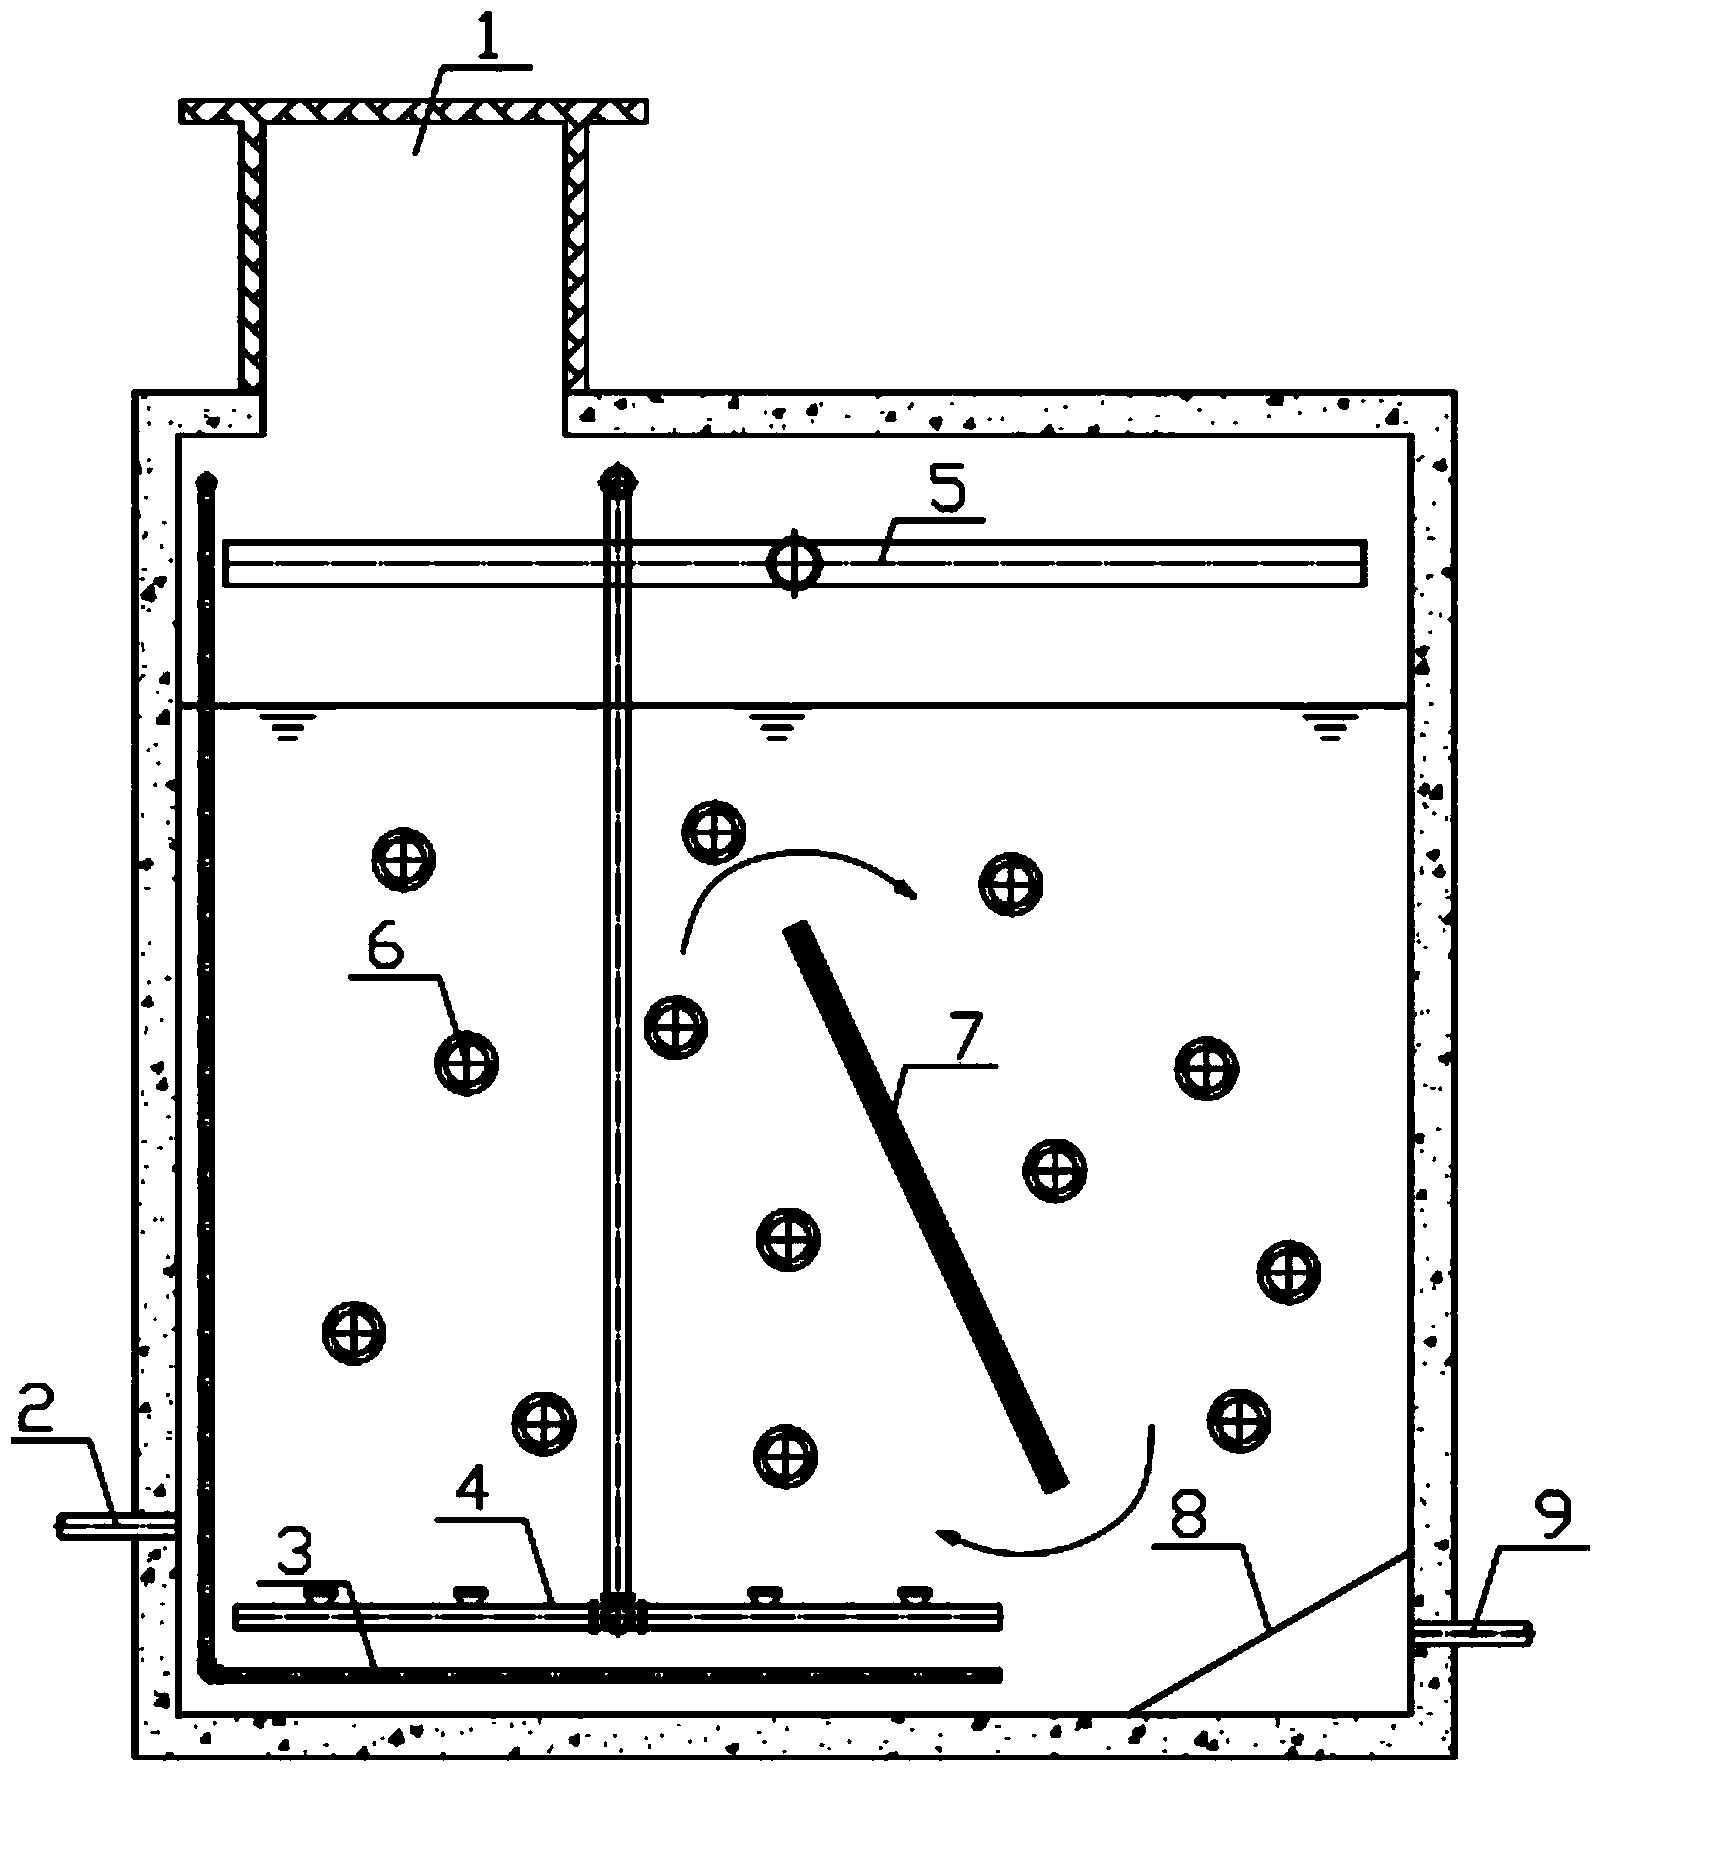 Combined aeration moving bed bio-membrane reactor